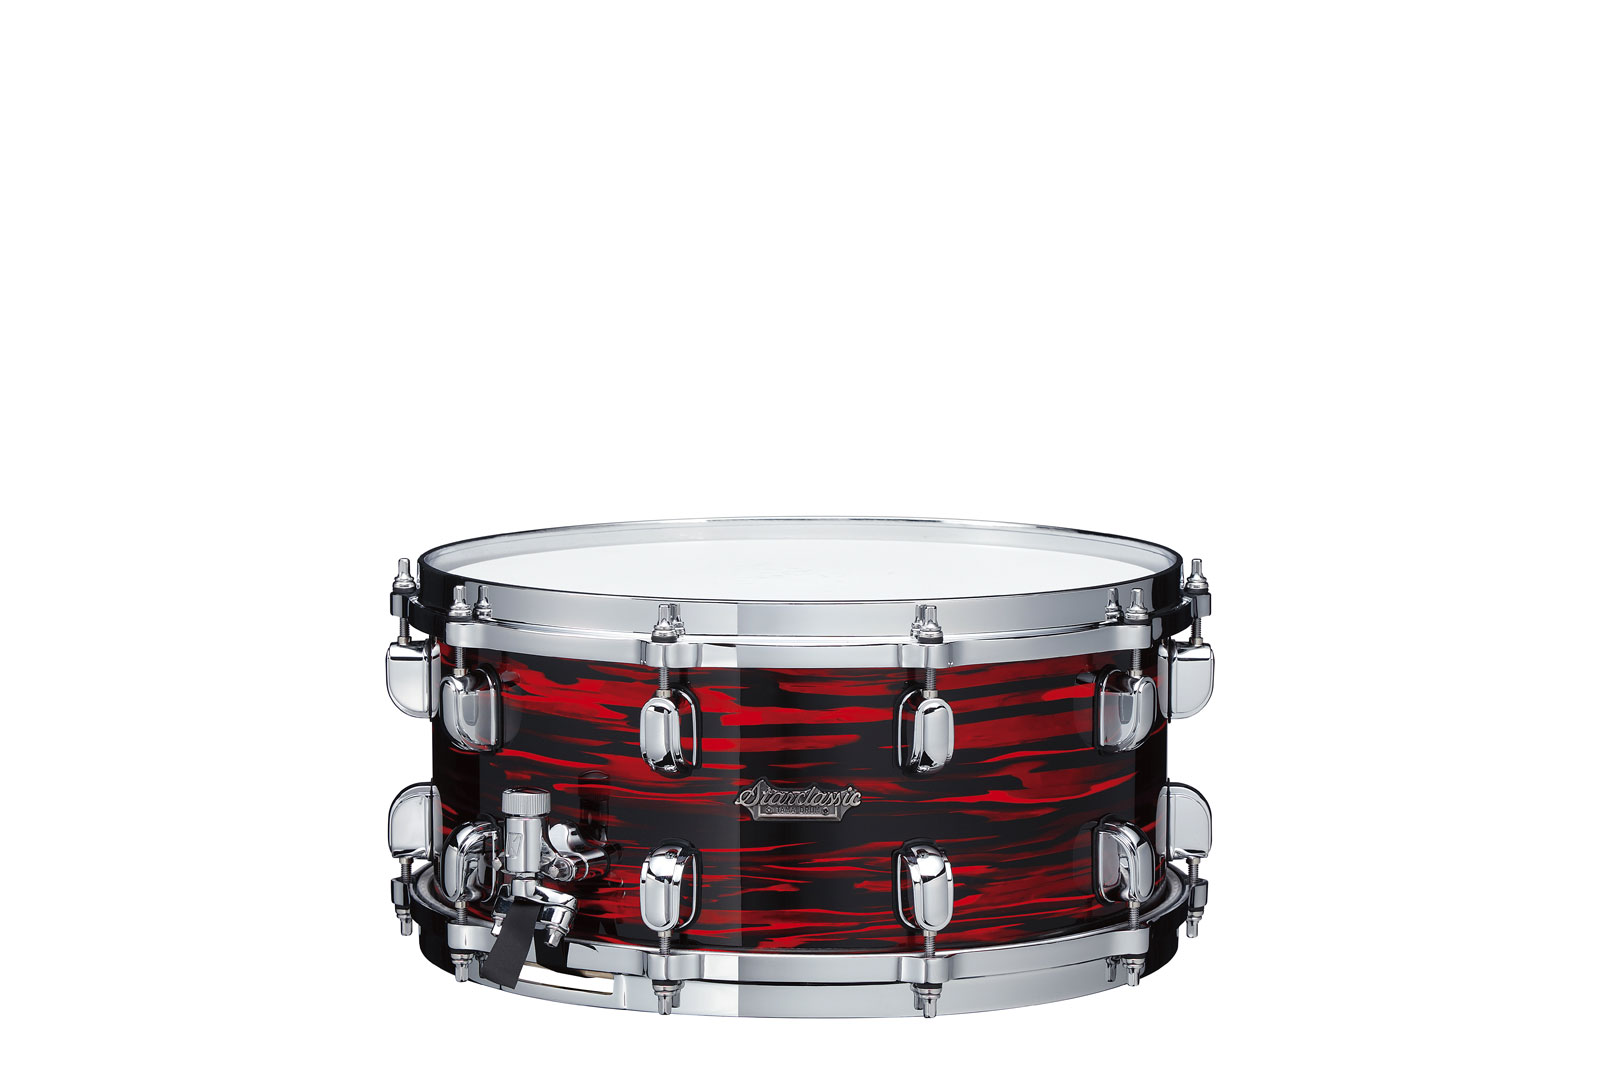 TAMA STARCLASSIC MAPLE 14X6.5 SNARE DRUM, CHROME SHELL HARDWARE RED OYSTER